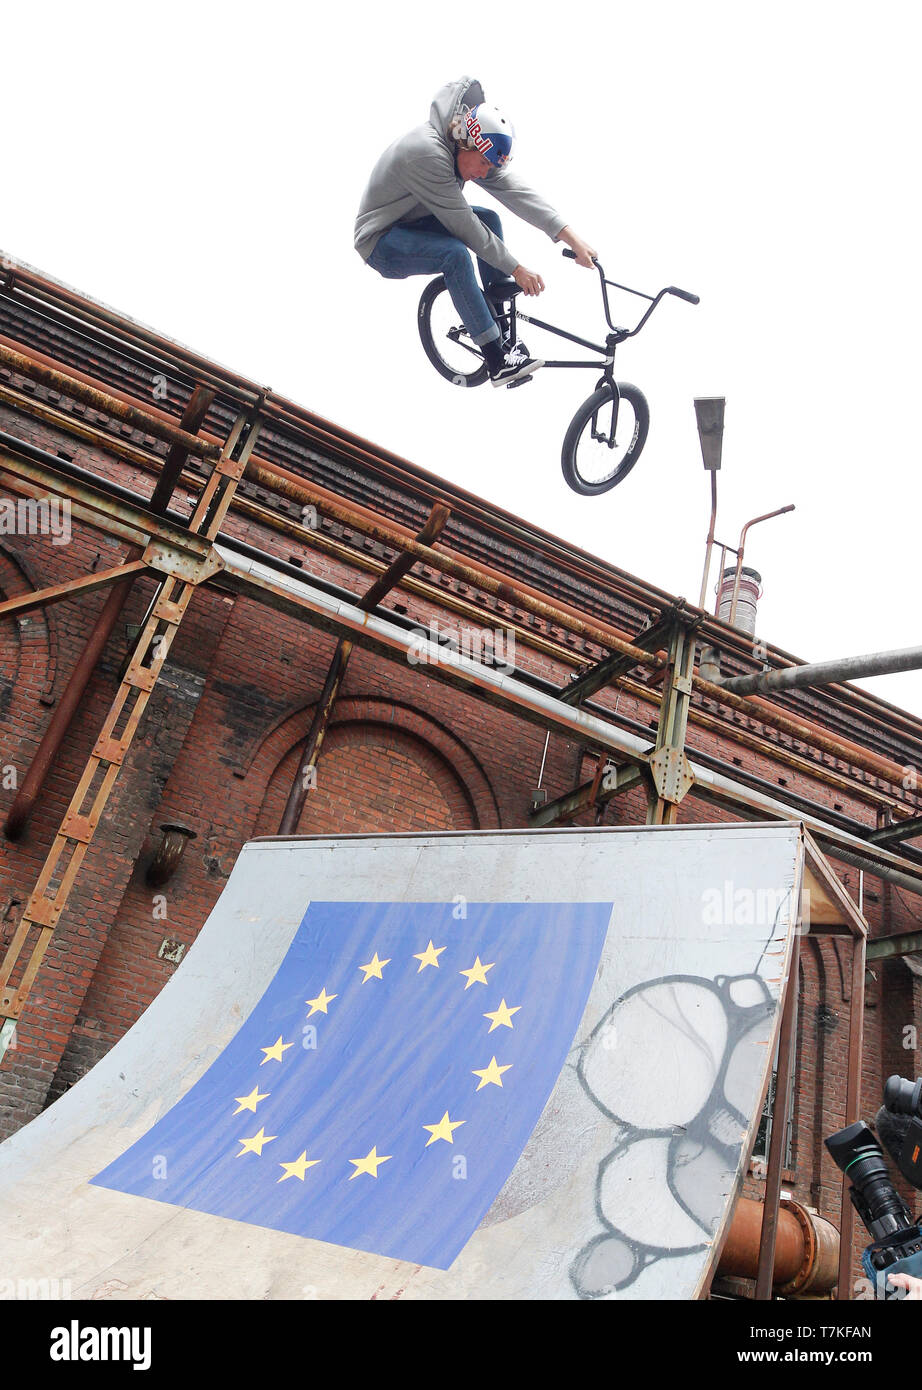 Duisburg, Germany. 08th May, 2019. Paul Thölen, BMX rider, shows a Toboggan-Air  during the presentation of the program of the "Ruhr Games". More than 5500  participants are expected at the Ruhr Games.